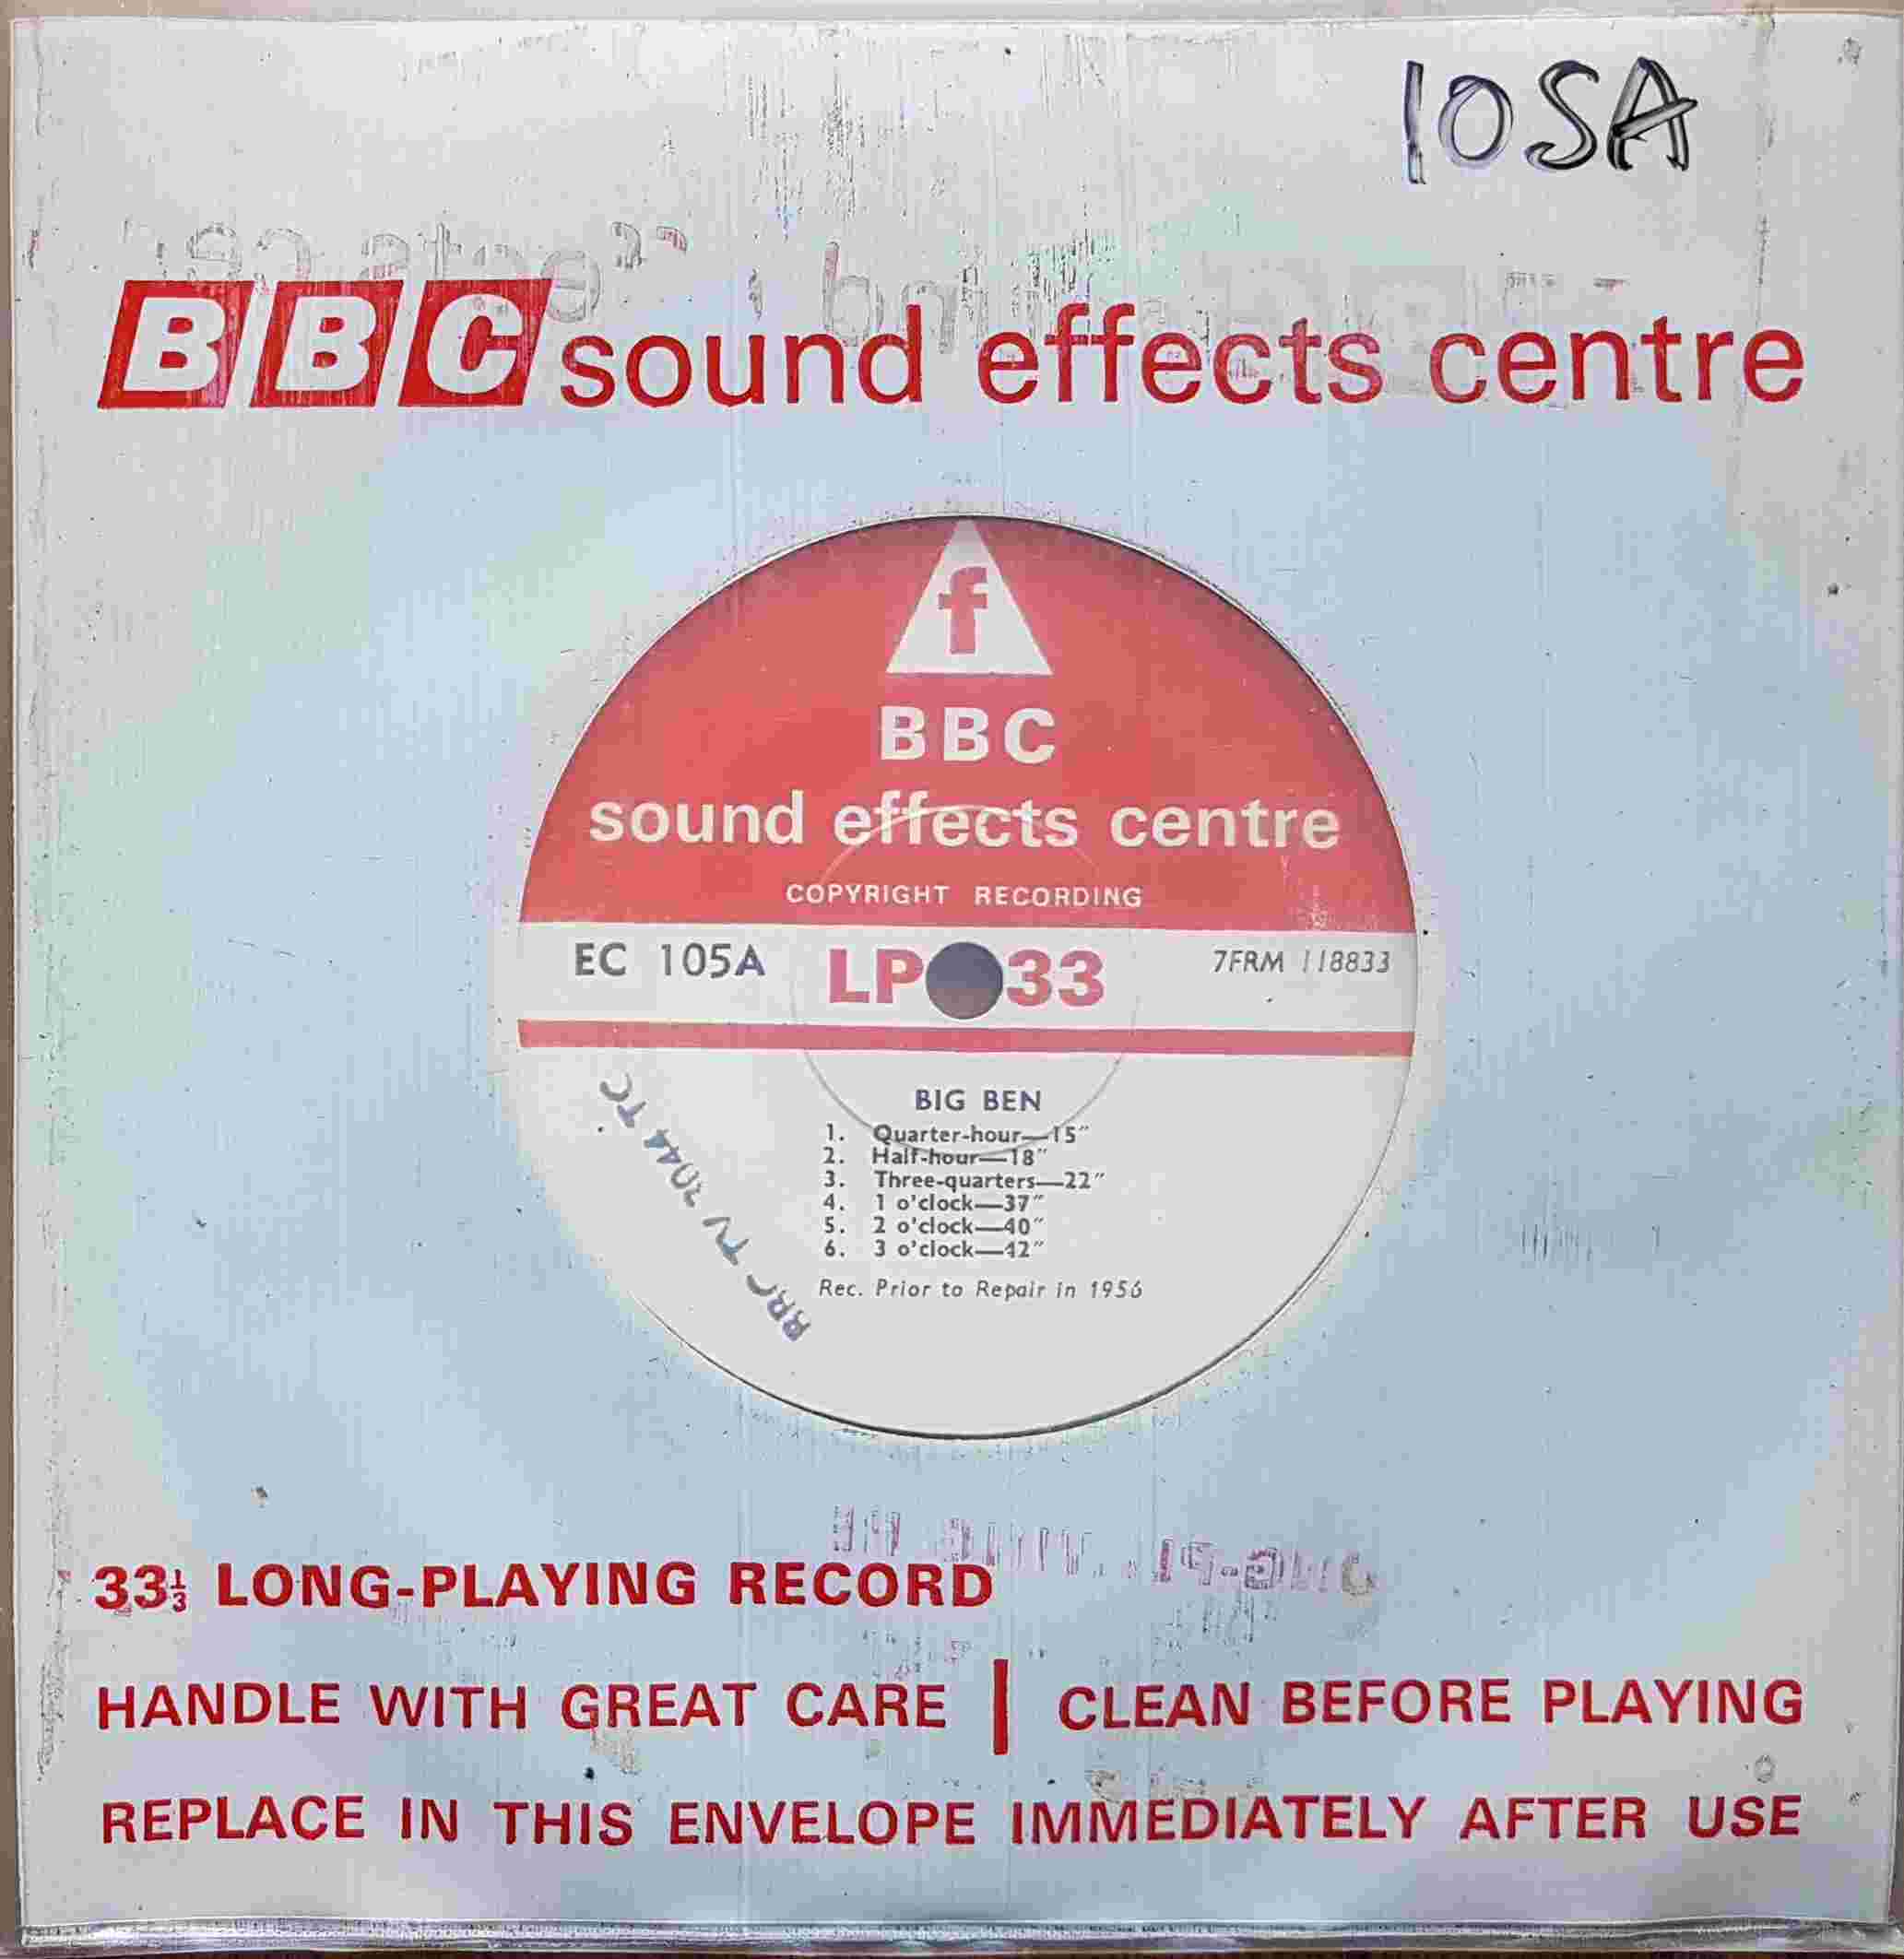 Picture of EC 105A Big Ben by artist Not registered from the BBC singles - Records and Tapes library